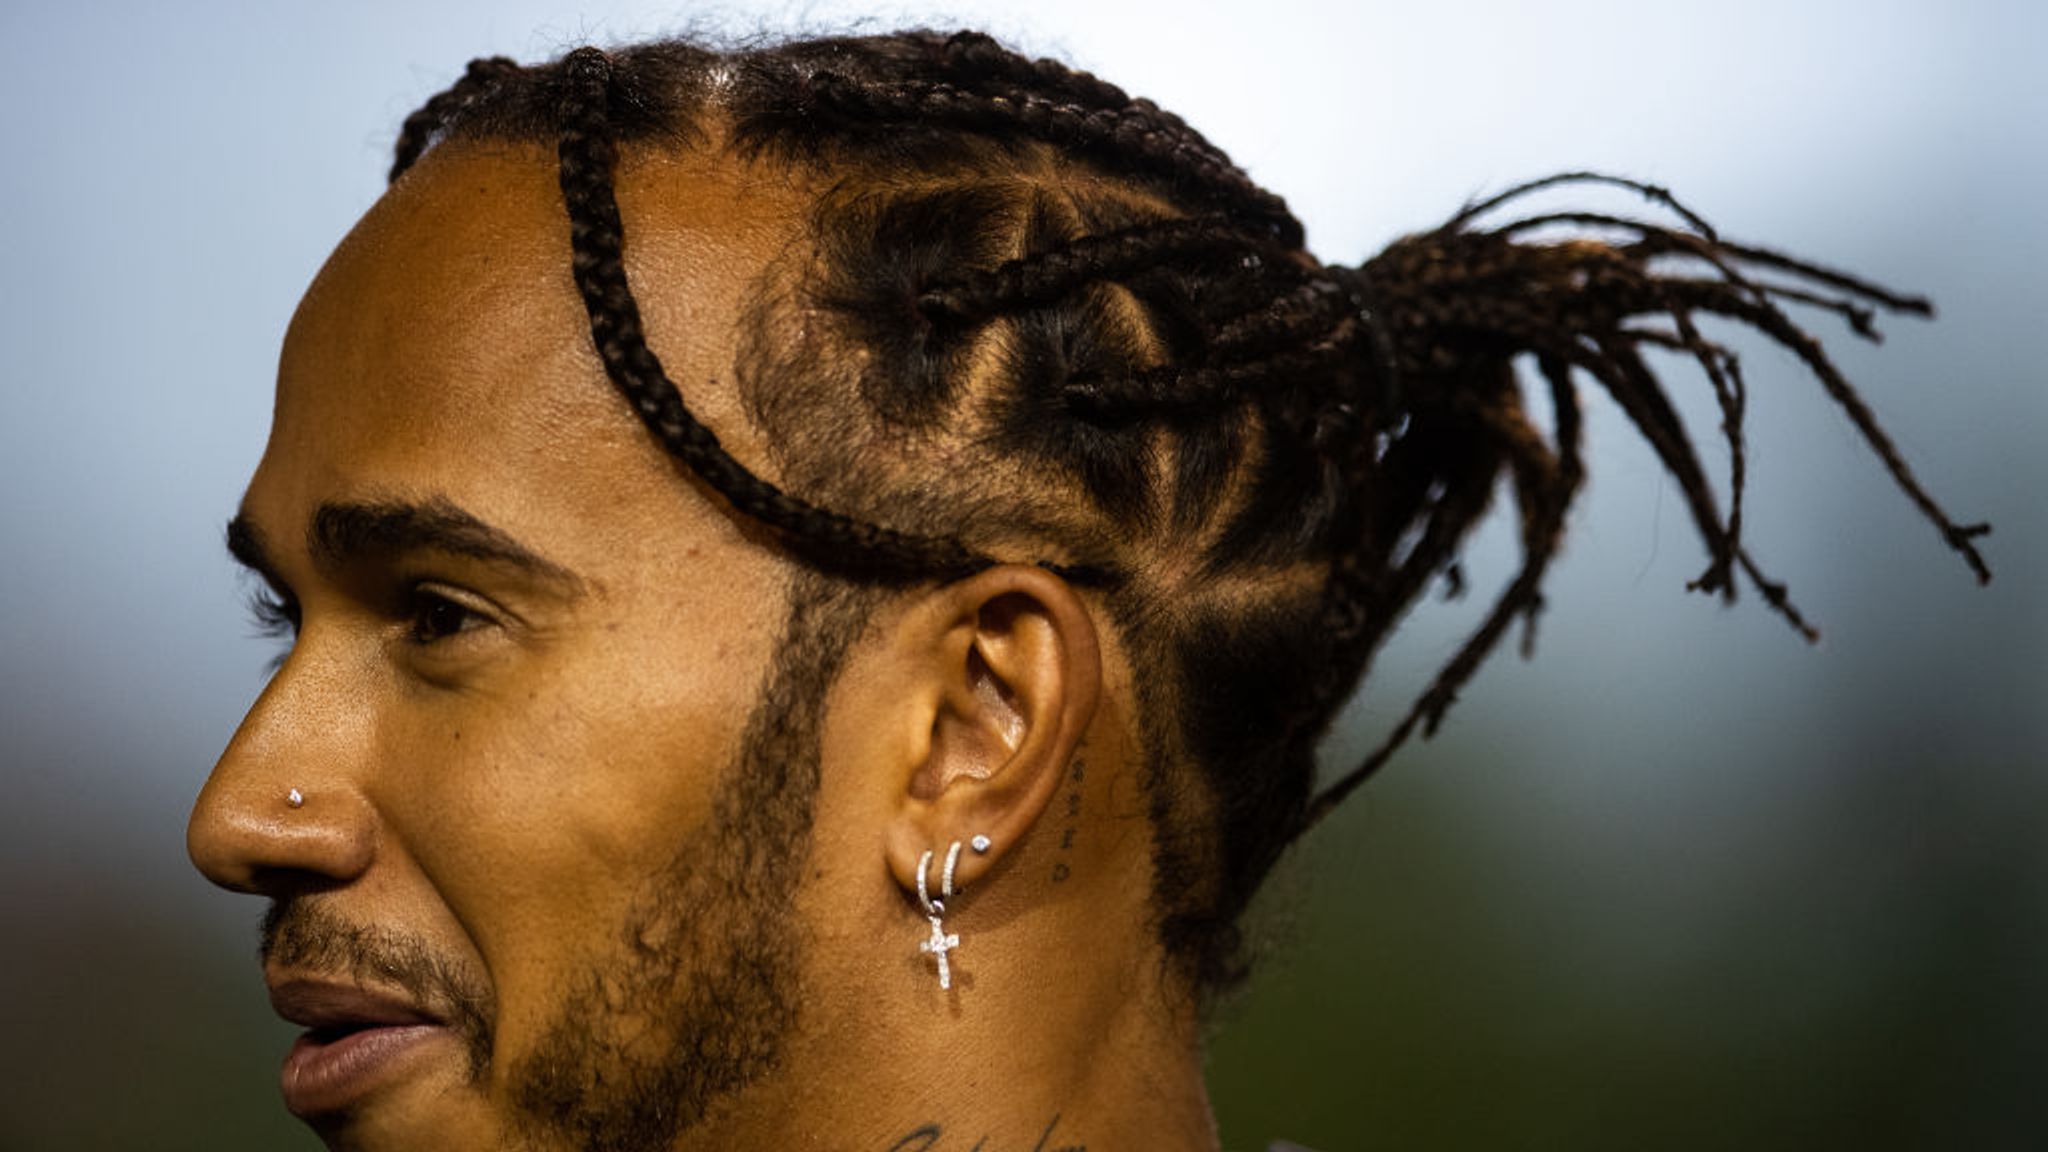 Lewis Hamiltons Hair Remains The Greatest Miracle Since The Resurrection   DMARGE